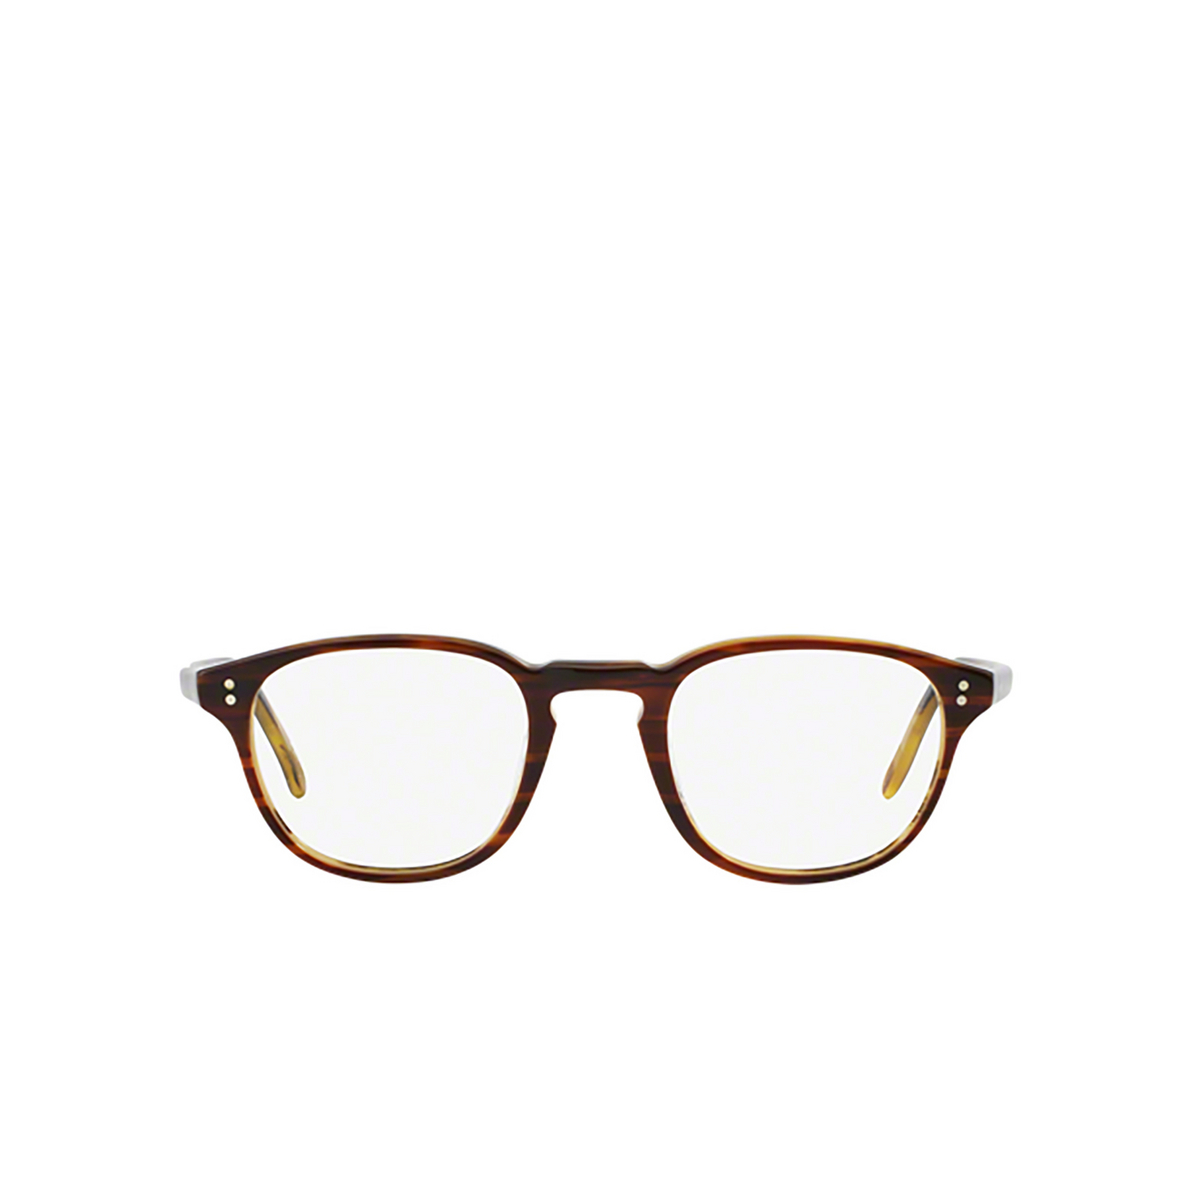 Oliver Peoples FAIRMONT Eyeglasses 1310 Amaretto / Striped Honey - front view